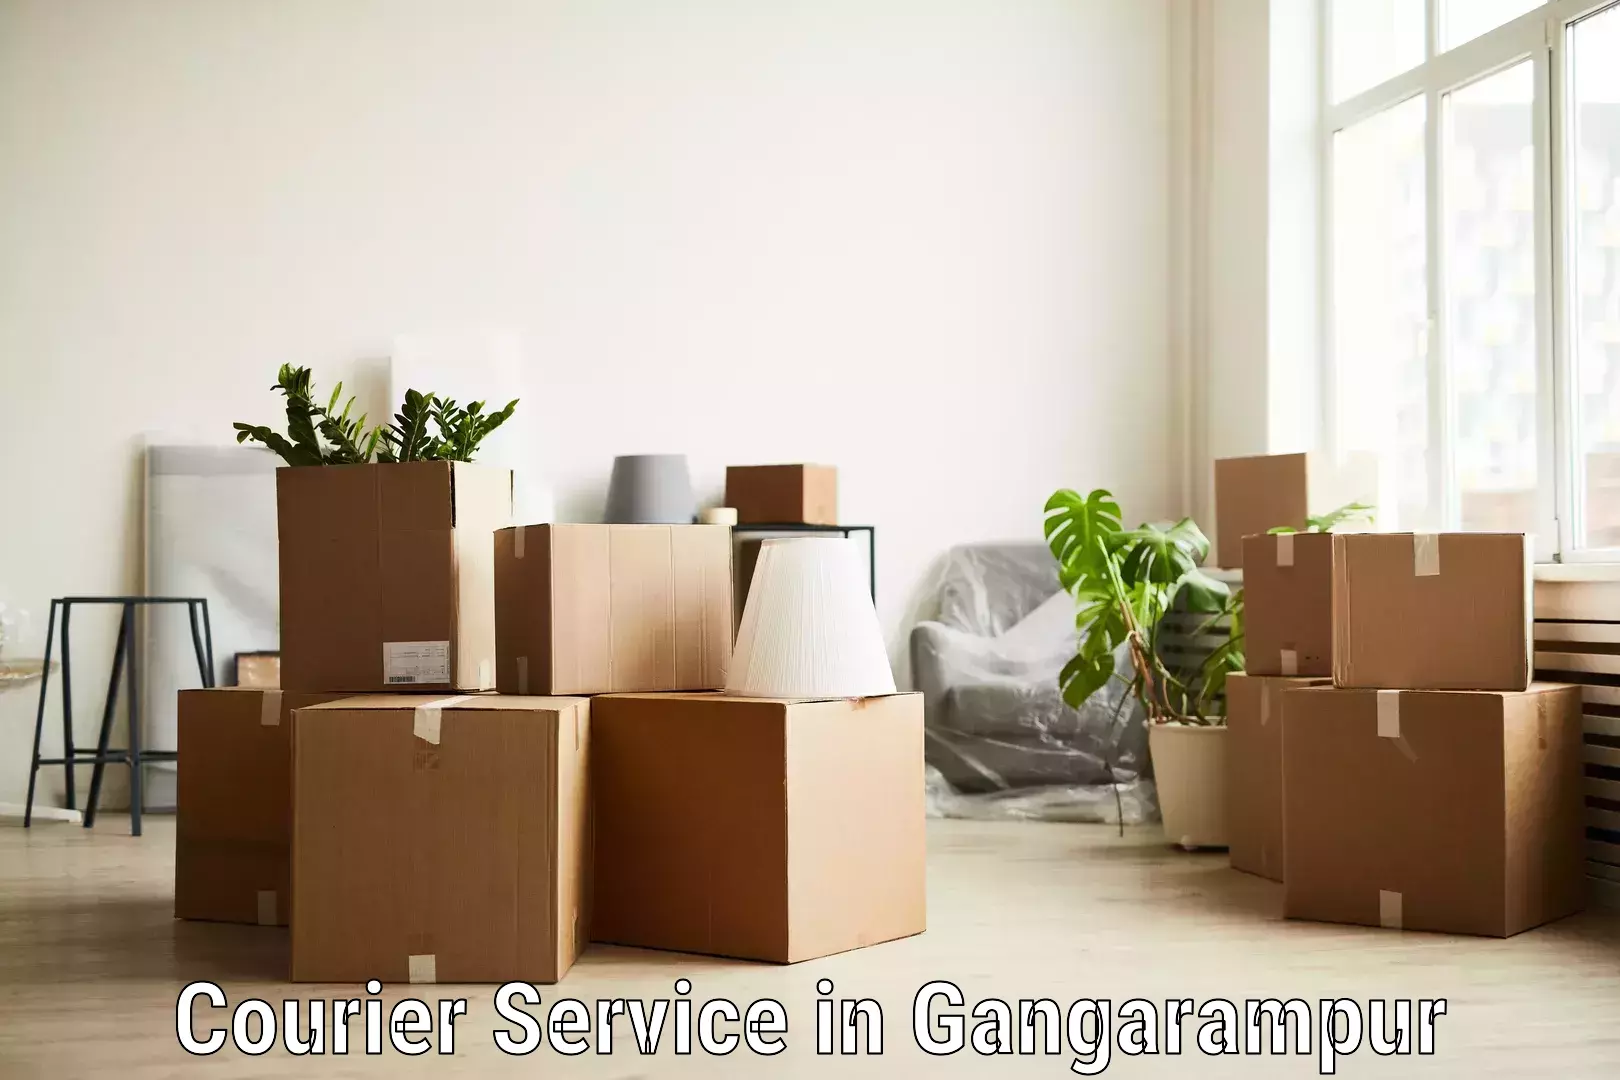 Premium delivery services in Gangarampur